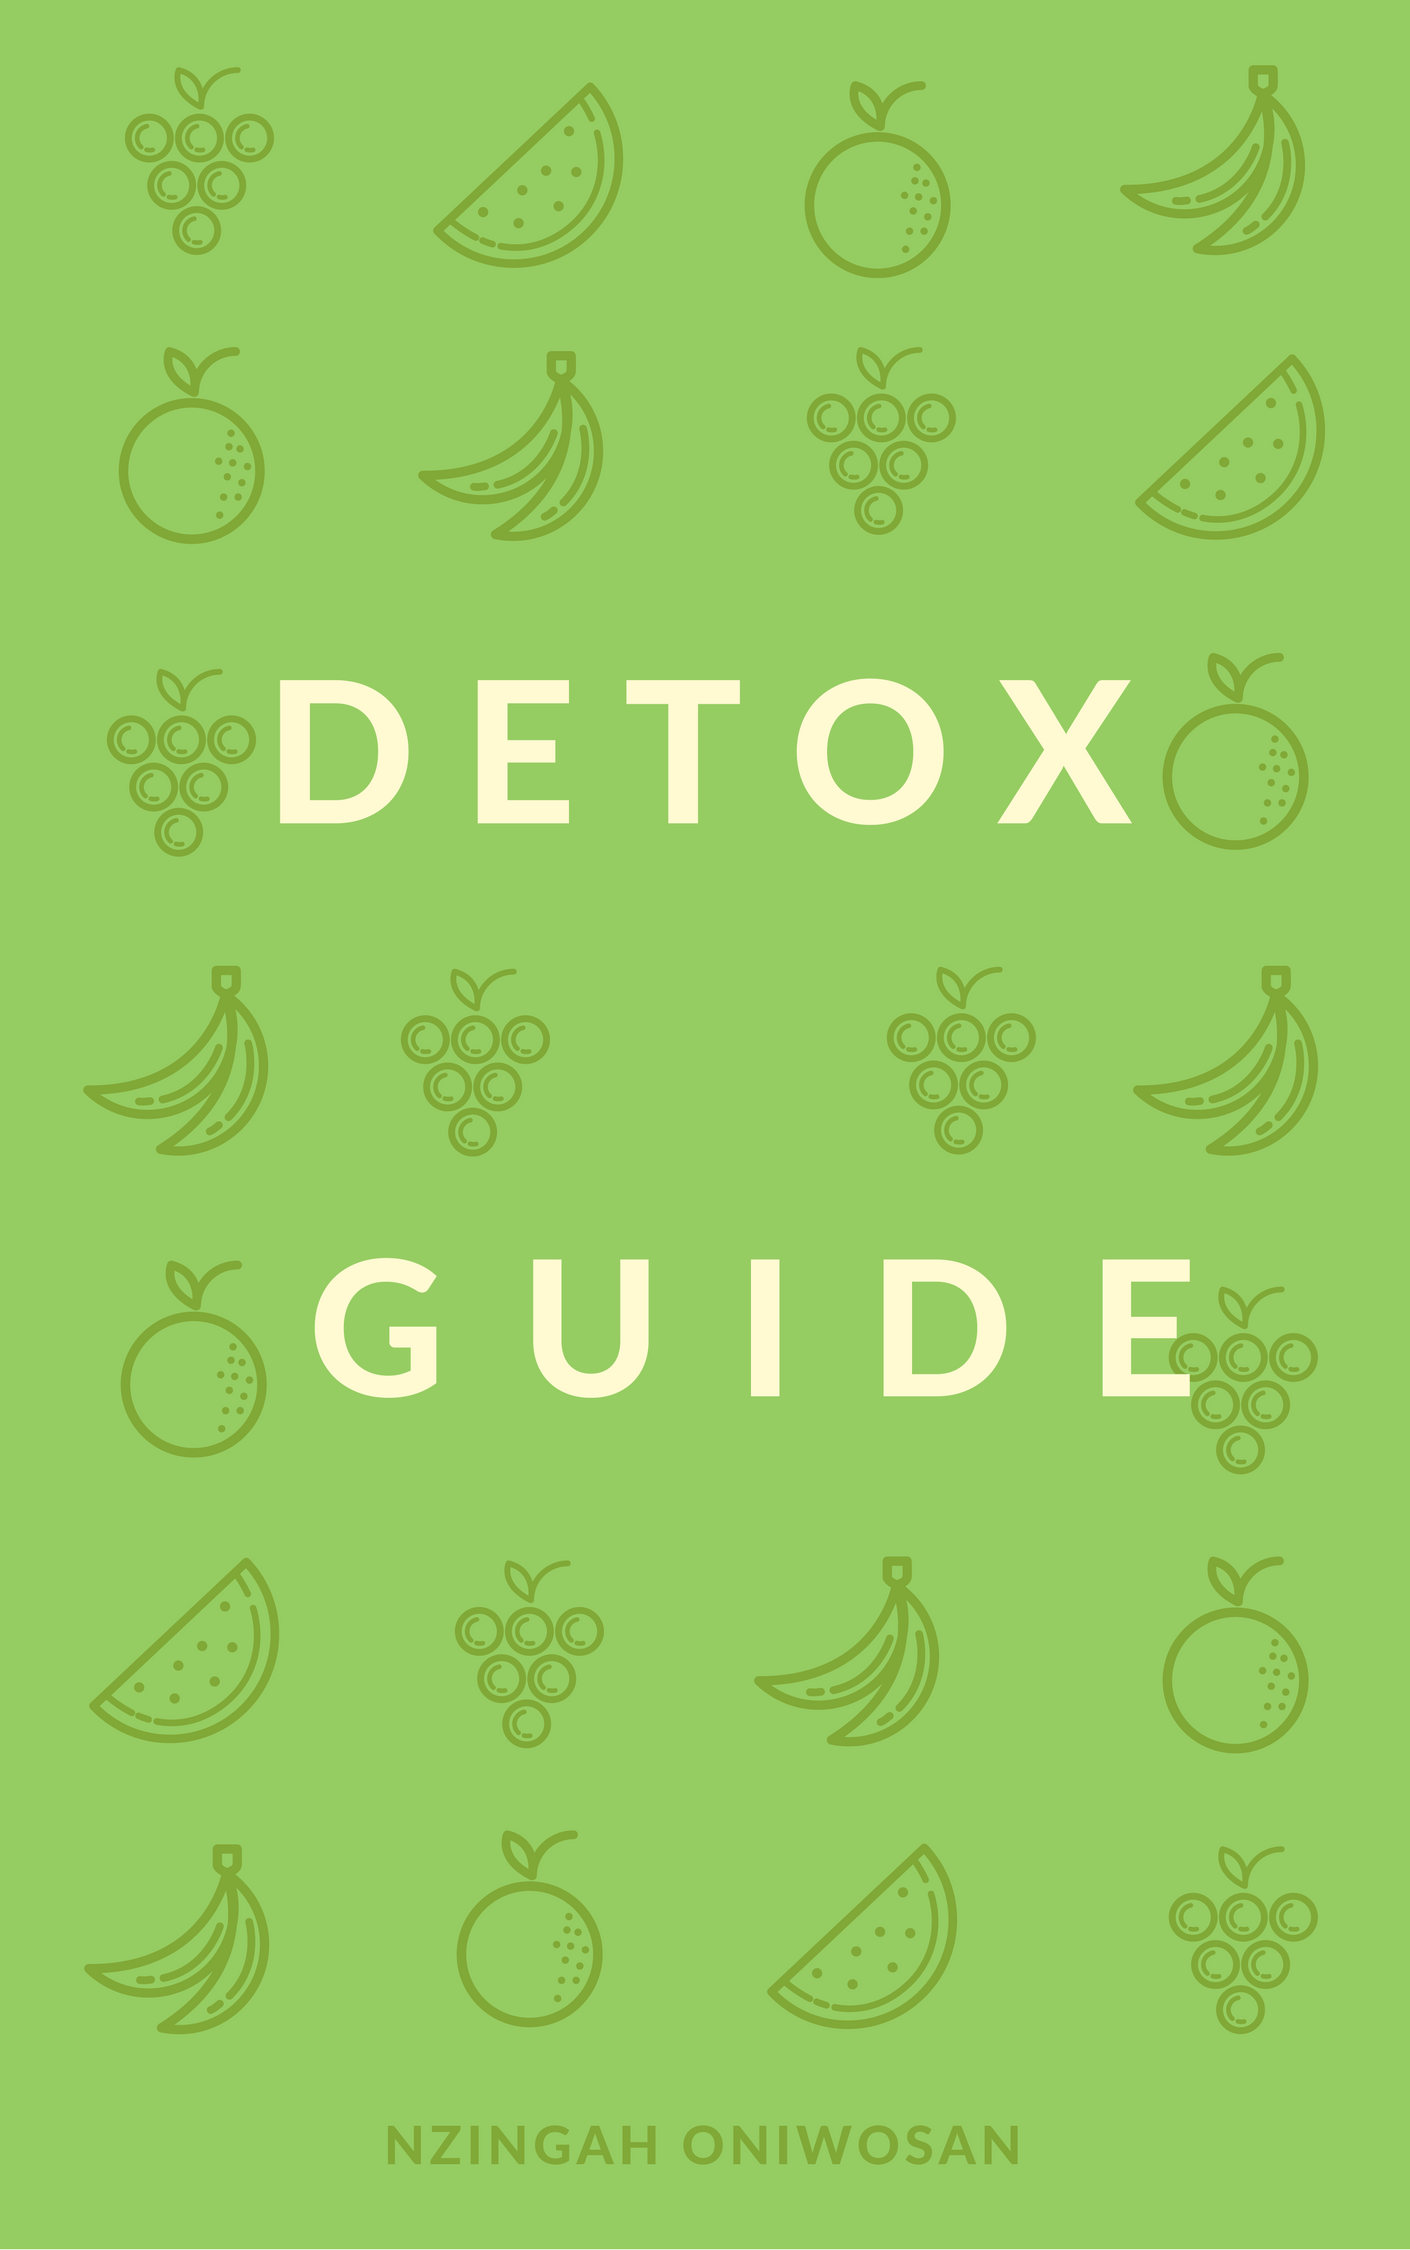 Detox EGUIDE and Herbal Protocol